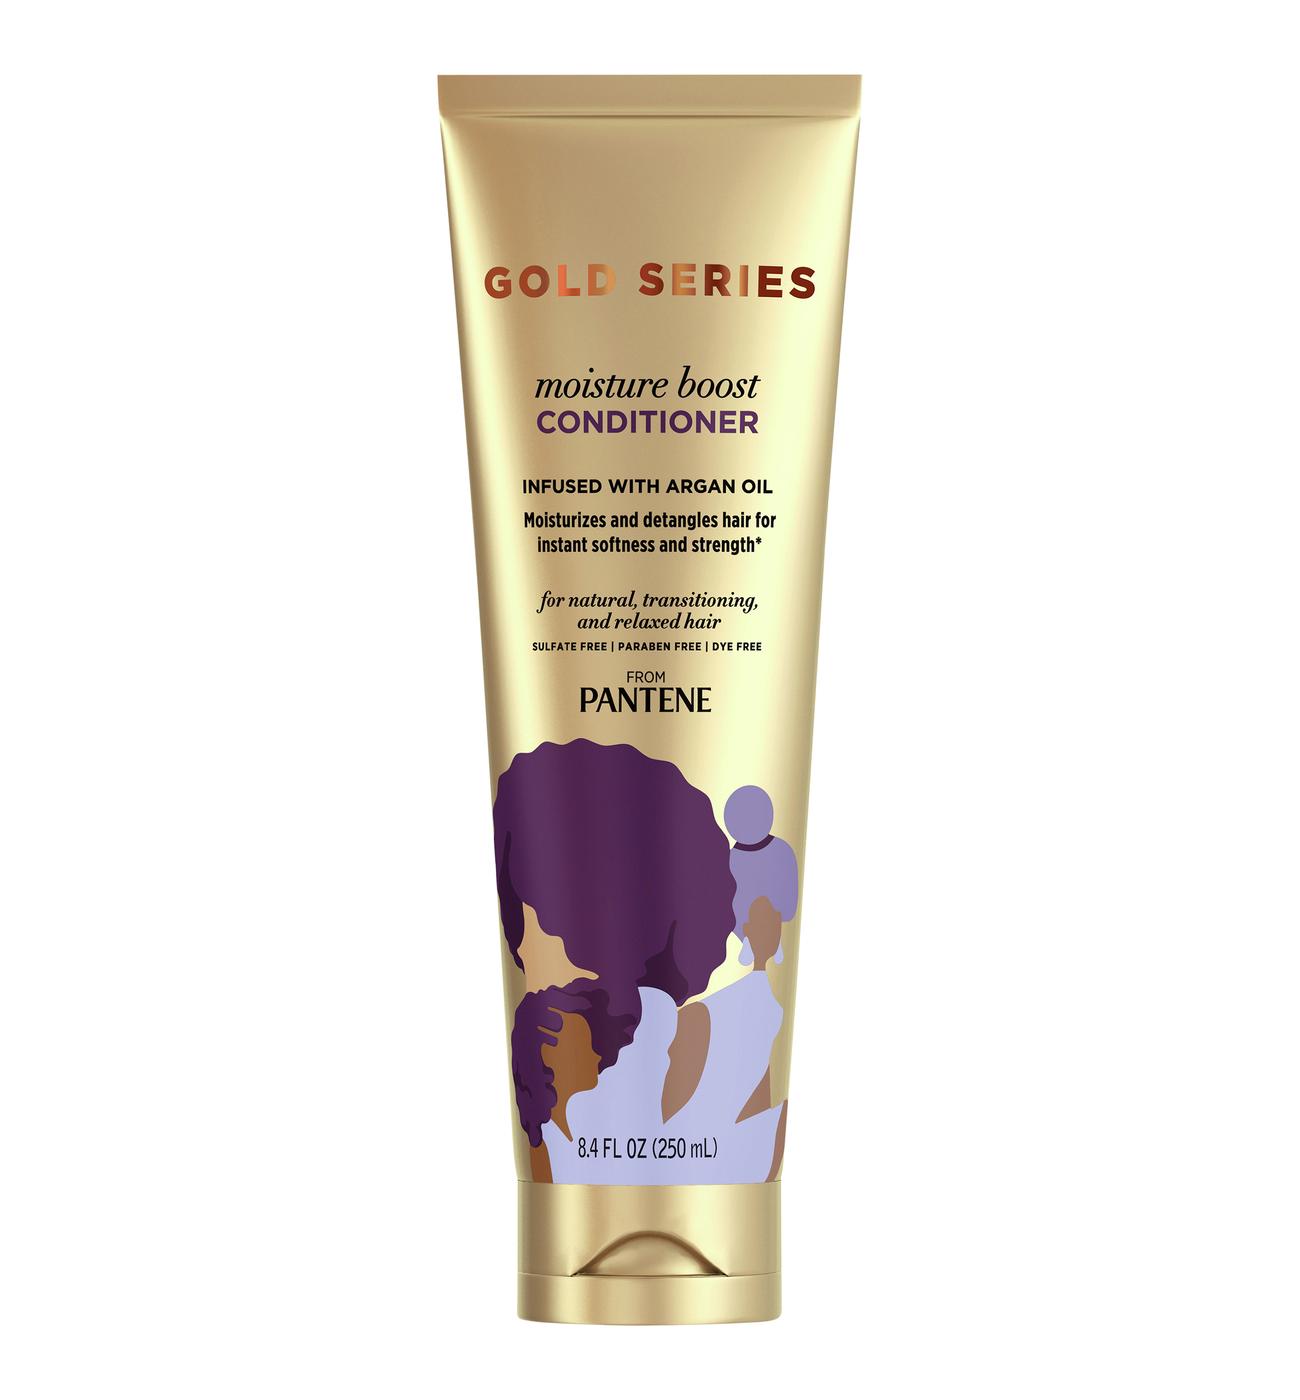 Pantene Gold Series Moisture Boost Conditioner; image 1 of 8